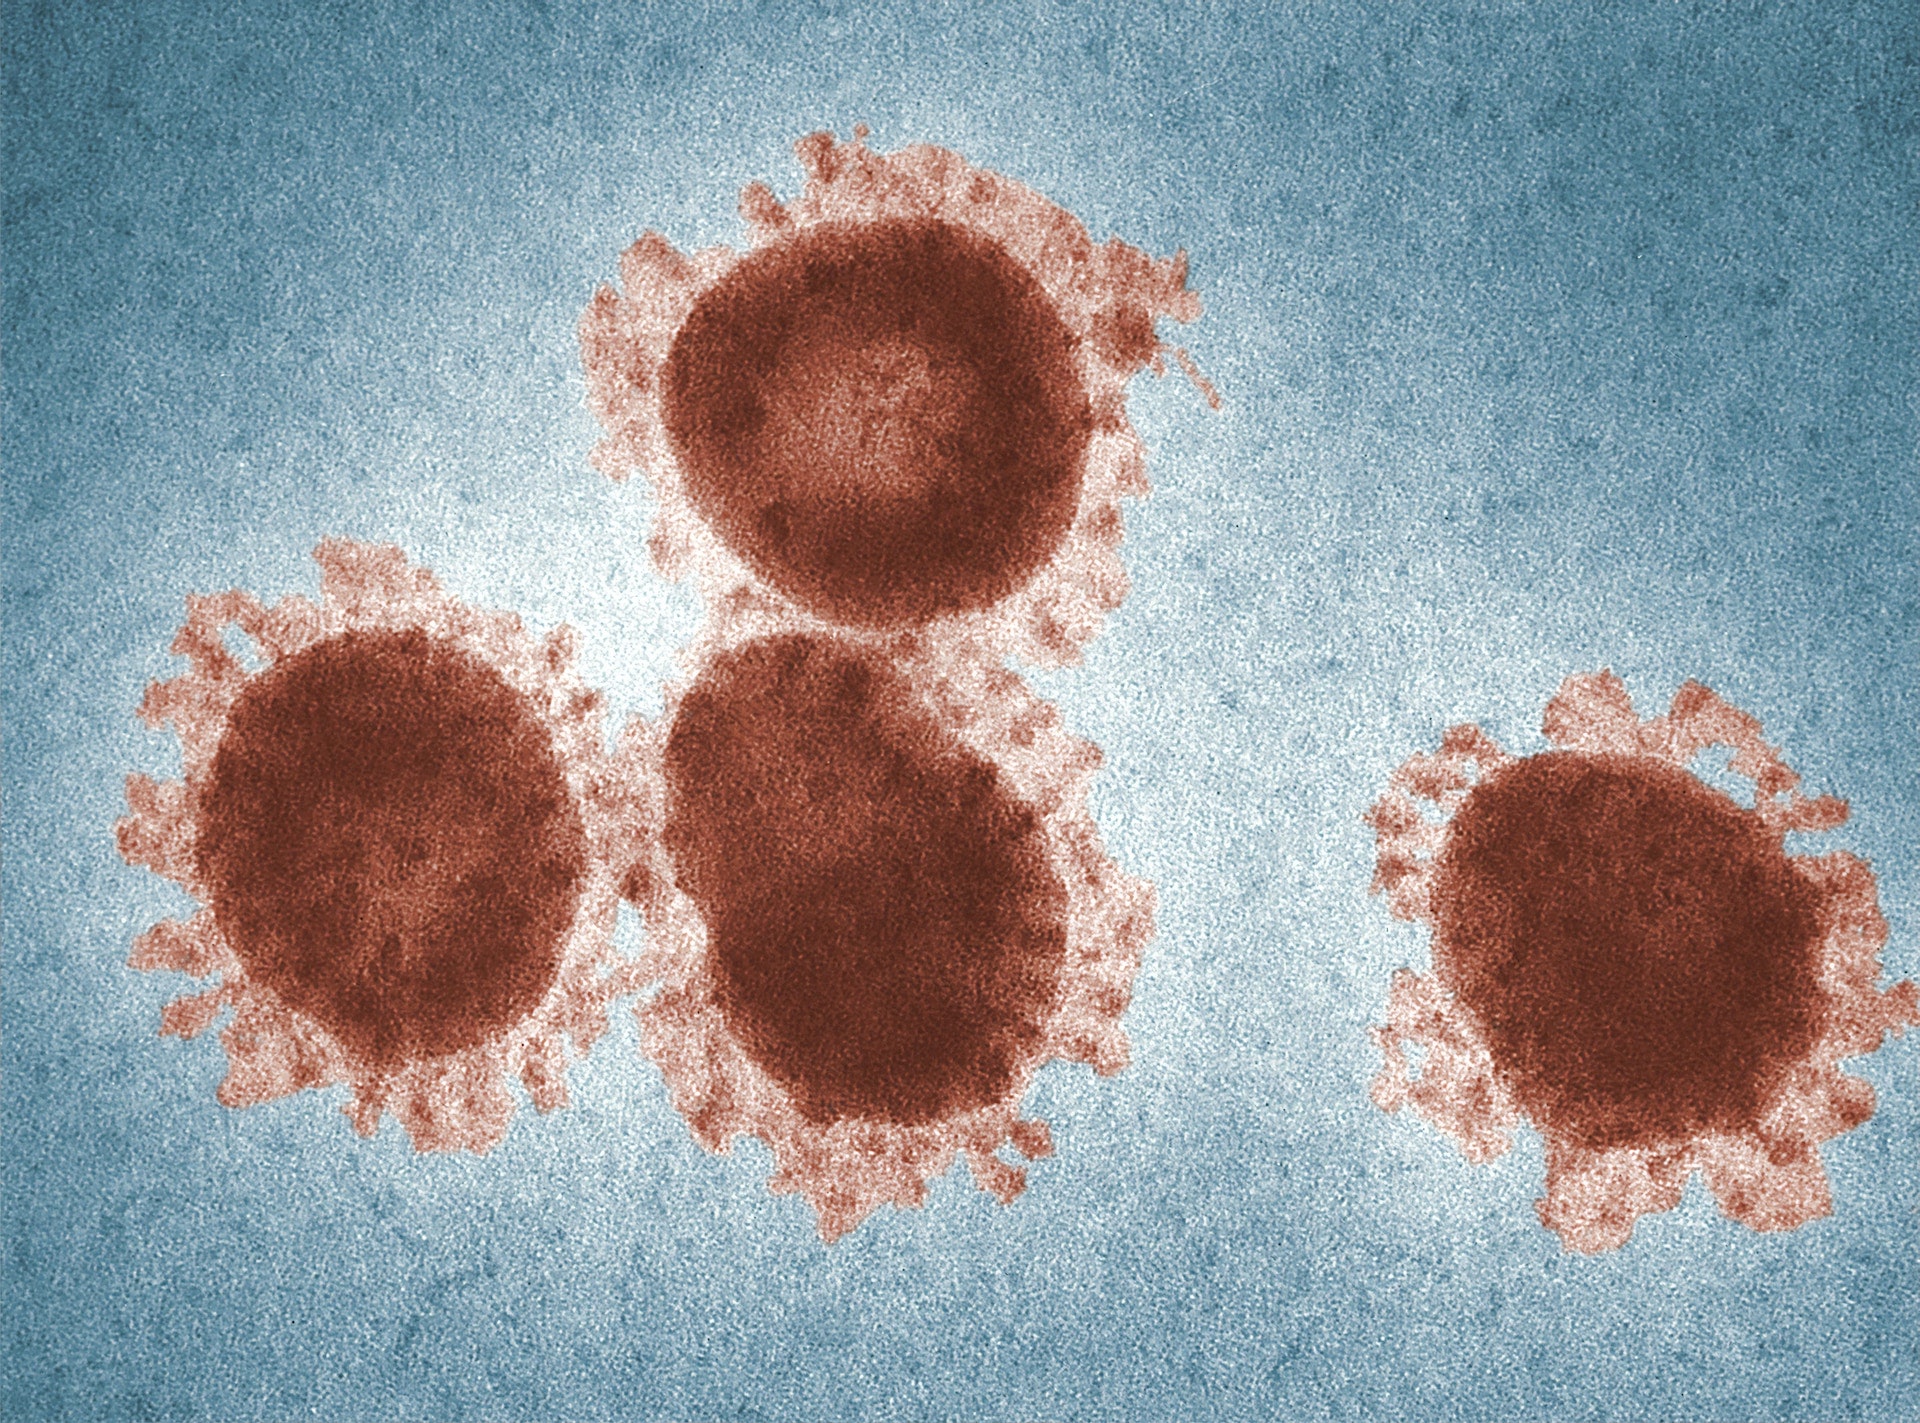 Tackle Today: Coronavirus Updates 🦠 - This 1975, digitally colorized transmission electron microscopic (TEM) image, depicted four avian infectious bronchitis virus (IBV) virions, which are Coronaviridae family members. IBV is a highly contagious pathogen, which infects poultry of all ages, affecting a number of organ systems, including the respiratory and urogenital organs. Photo by CDC on Unsplash